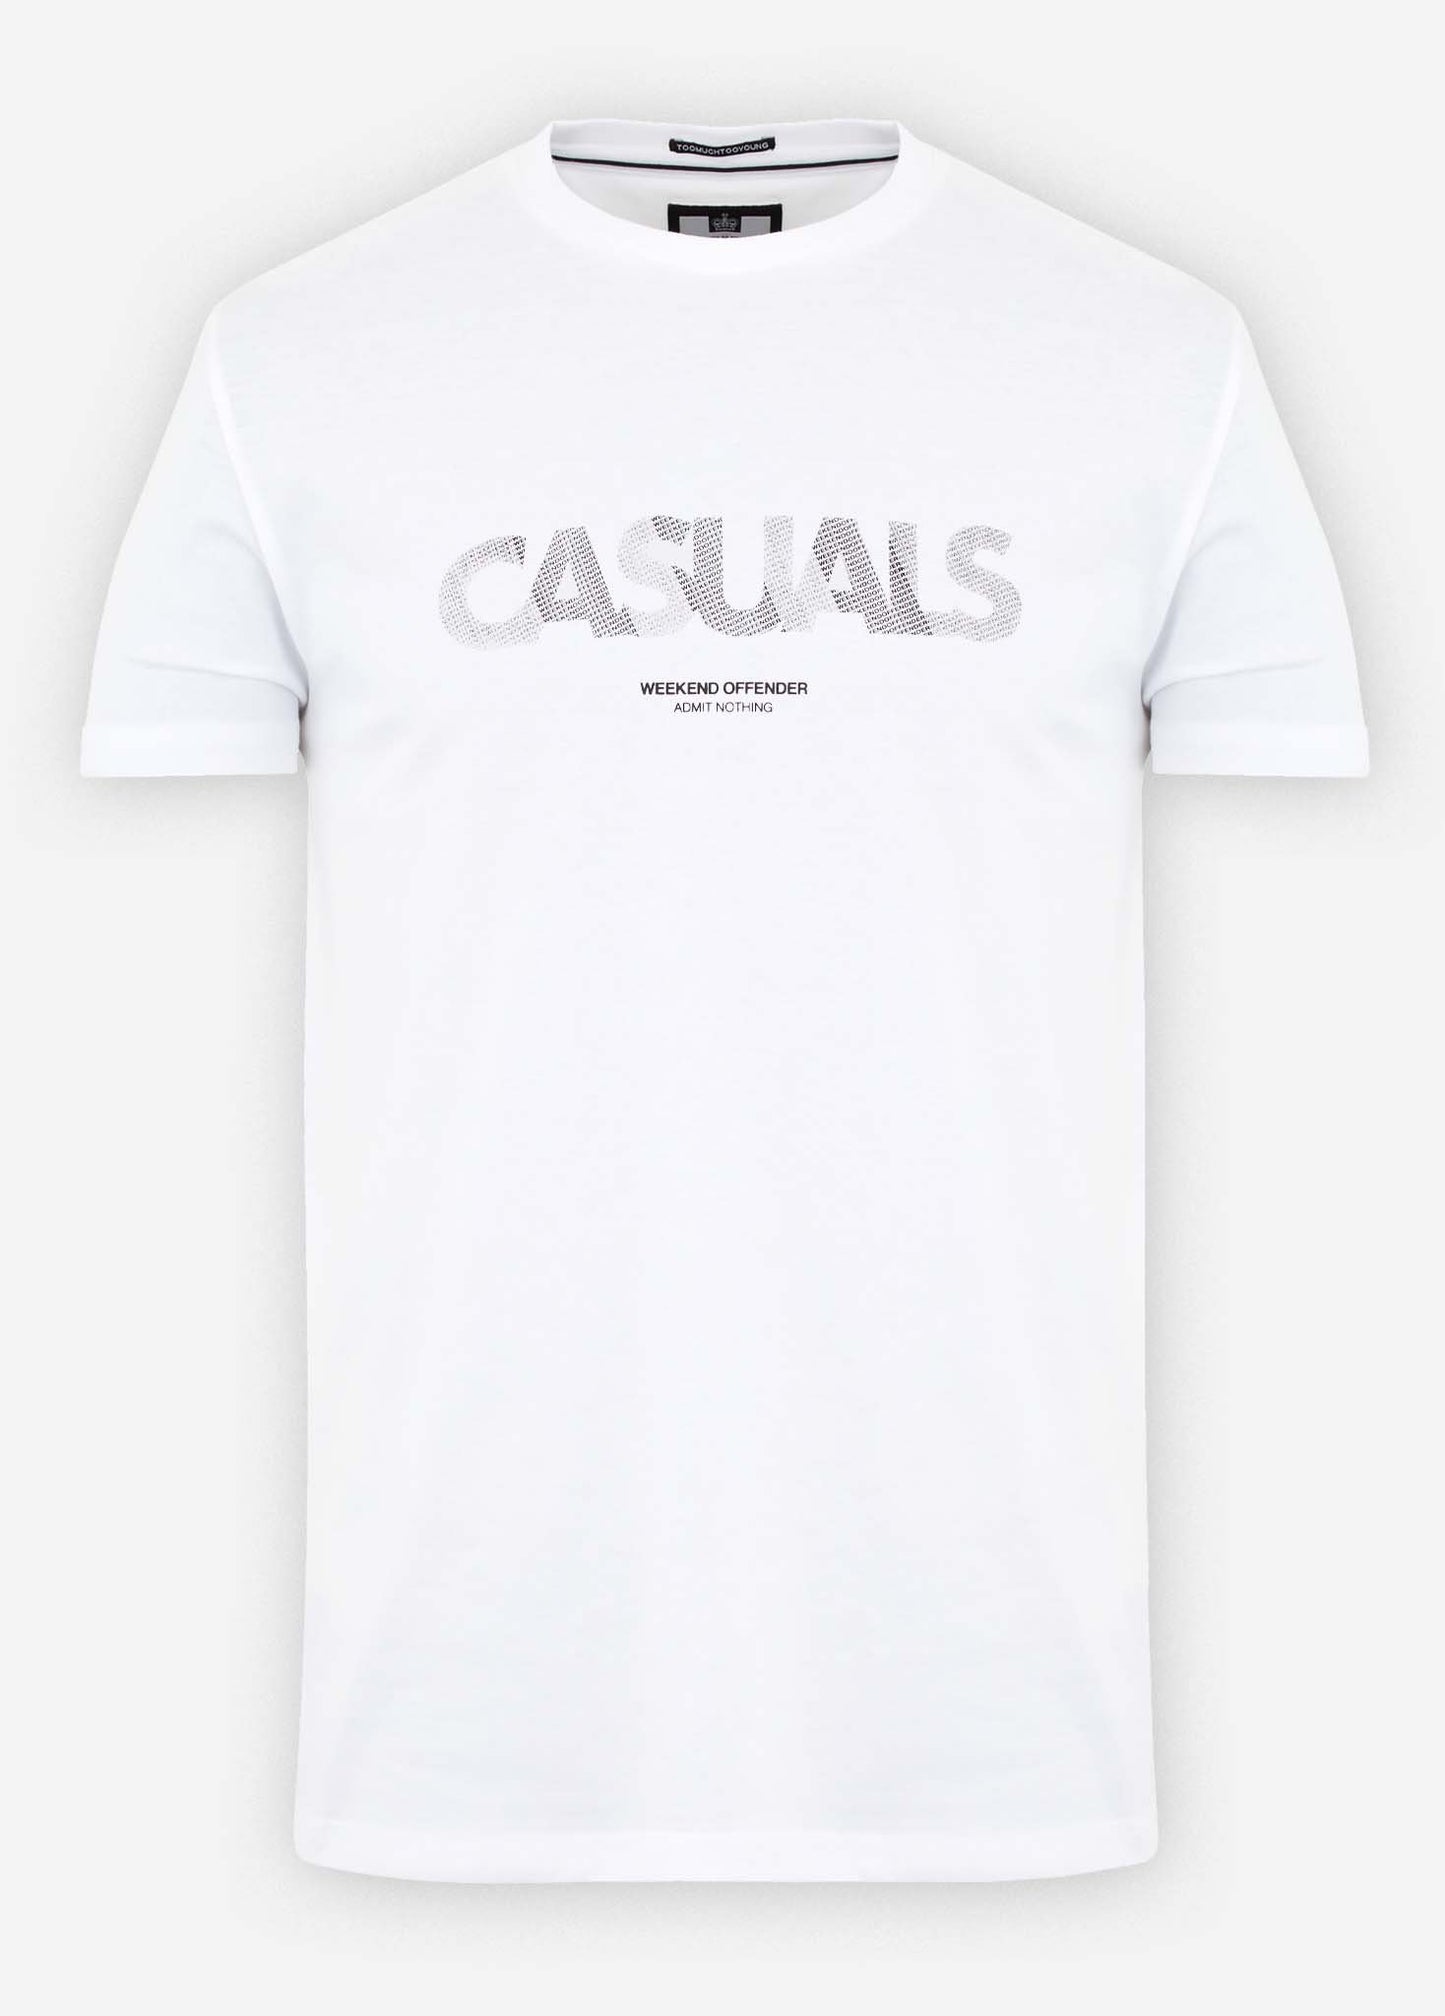 casuals t-shirt white weekend offender